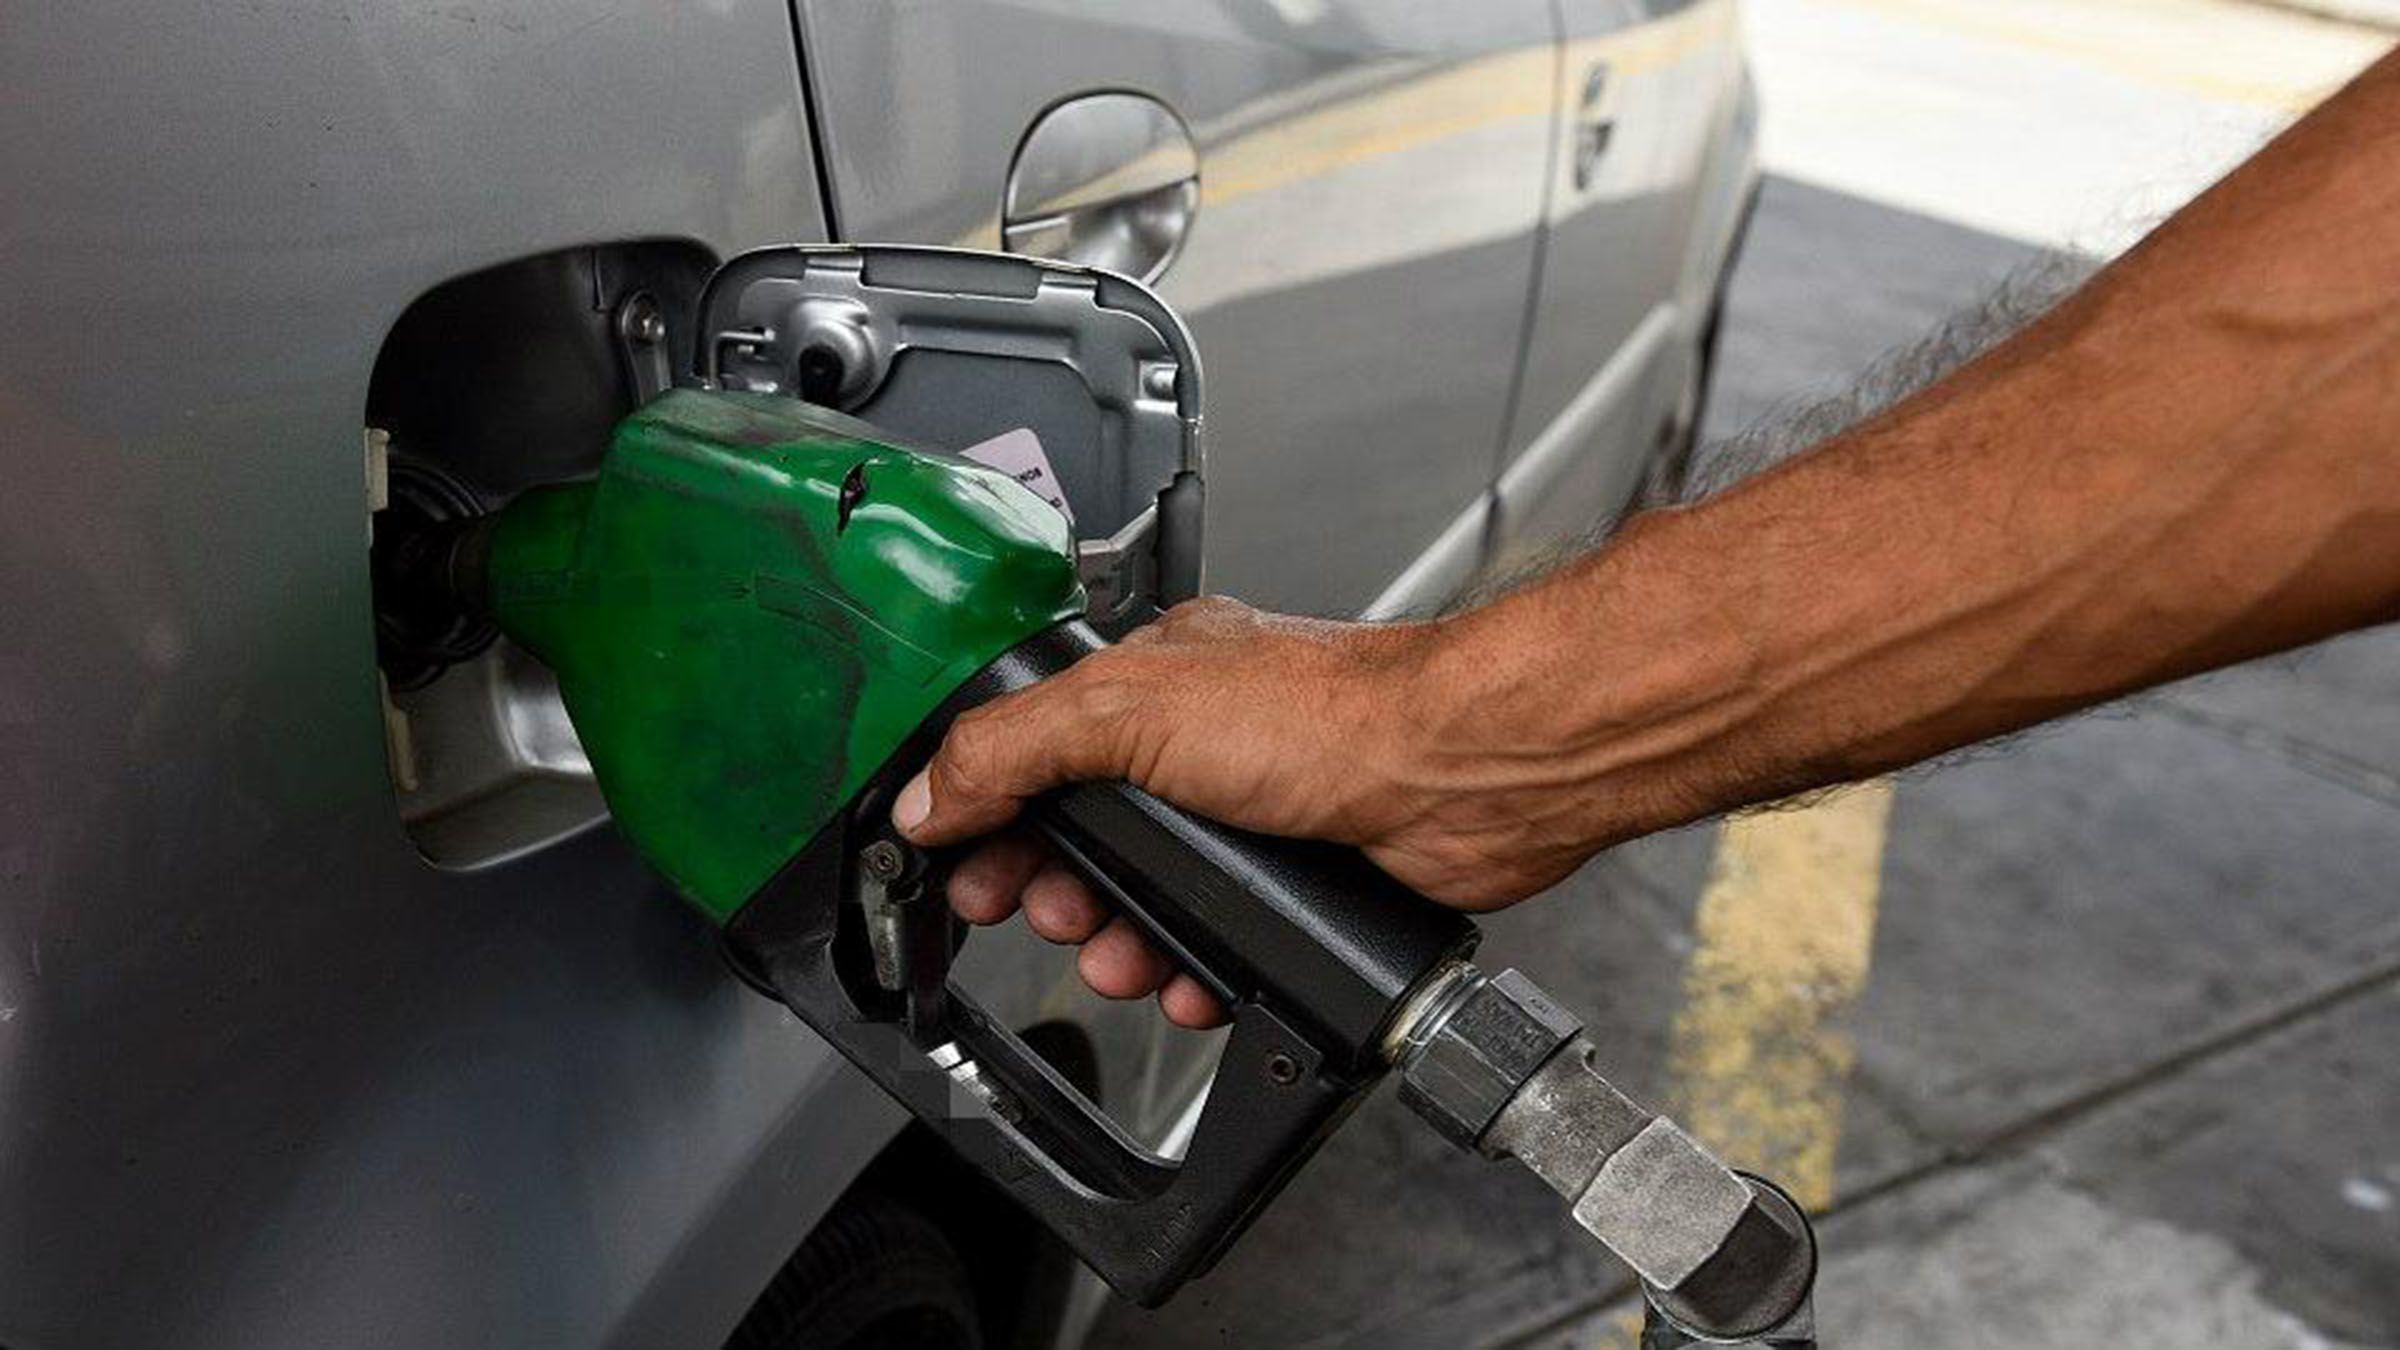 Another fuel price rollback rollback tomorrow